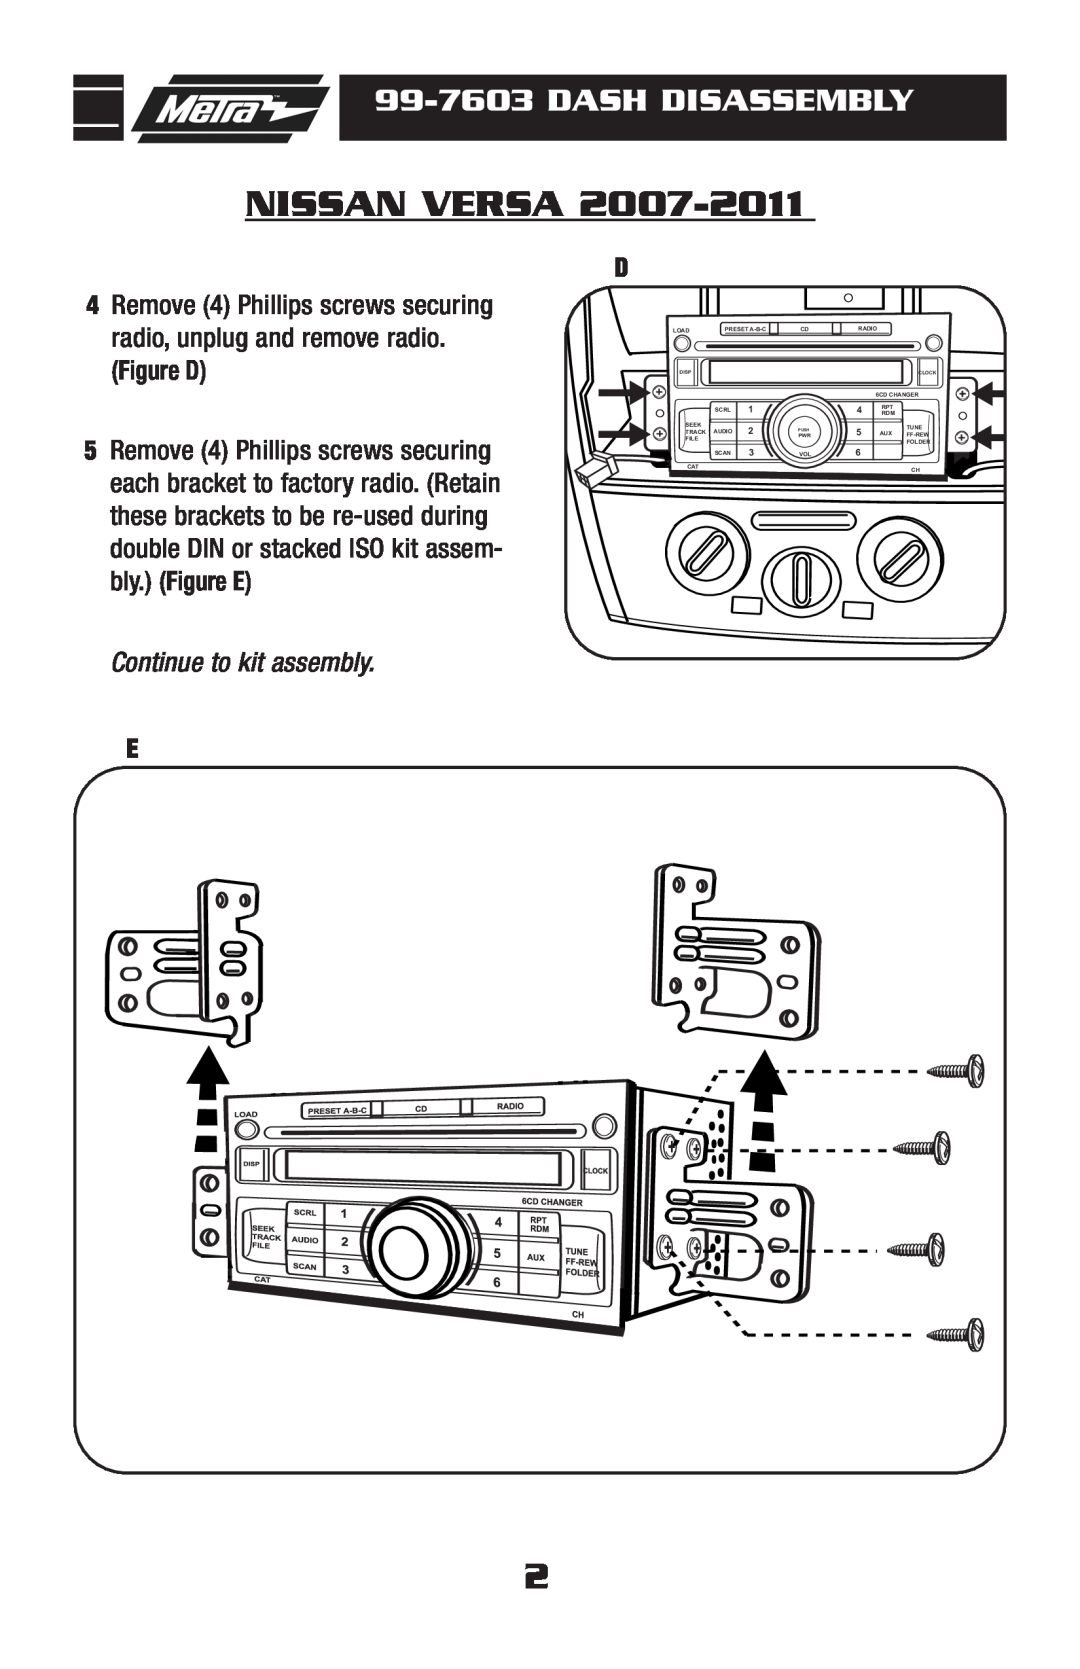 Metra Electronics 99-7603 installation instructions Figure D, Continue to kit assembly, Nissan Versa, Dash Disassembly 